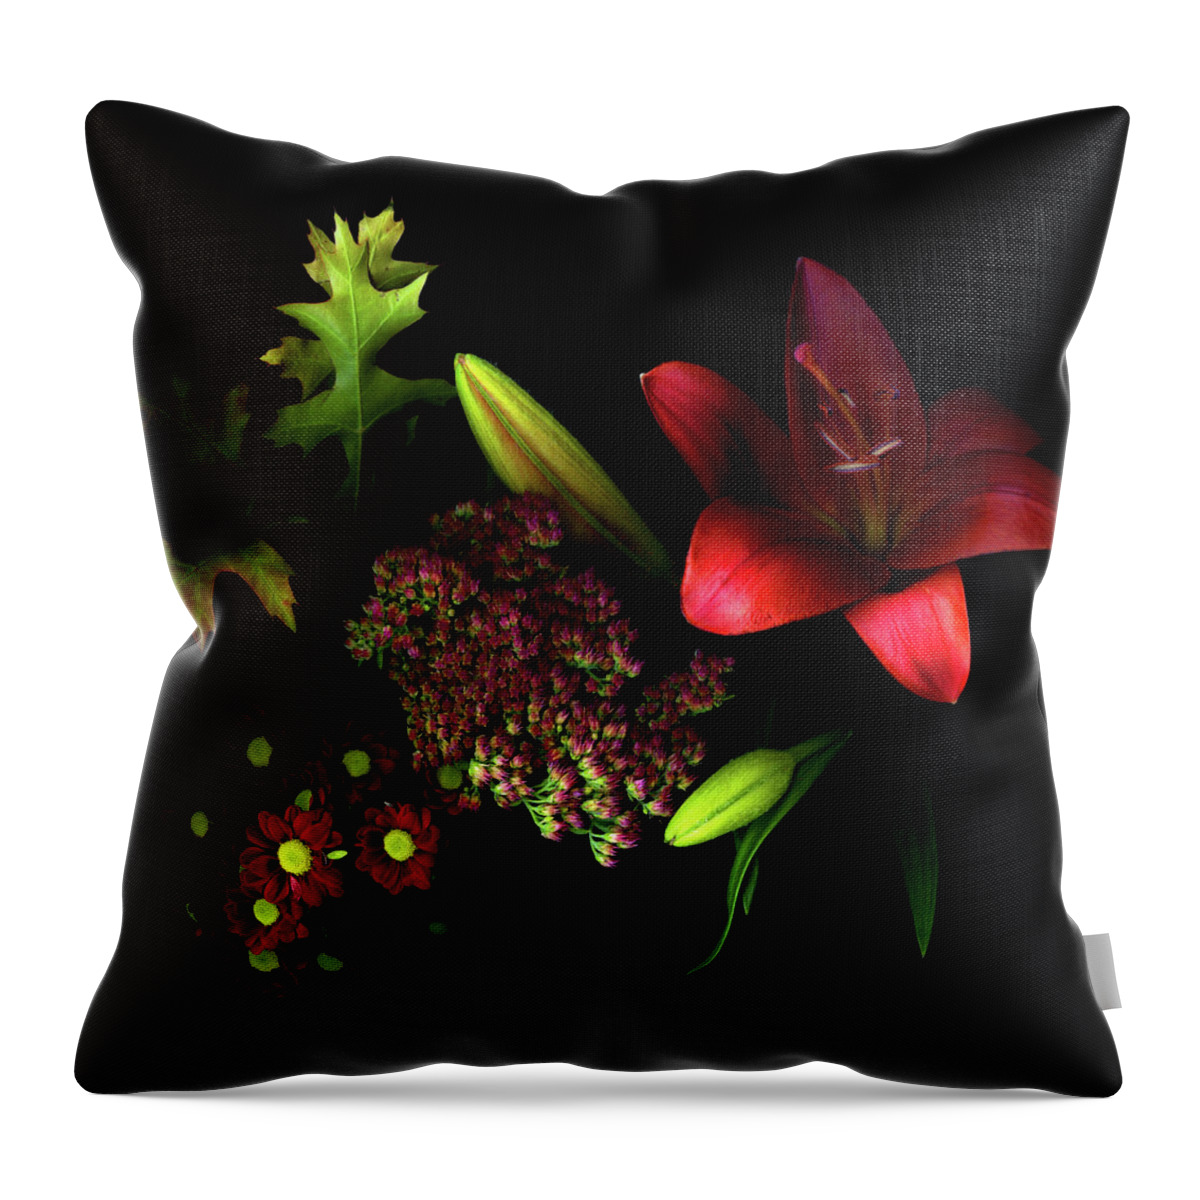 Chrysanthemum Throw Pillow featuring the photograph Autumnal Flower Bouquet by Photograph By Magda Indigo